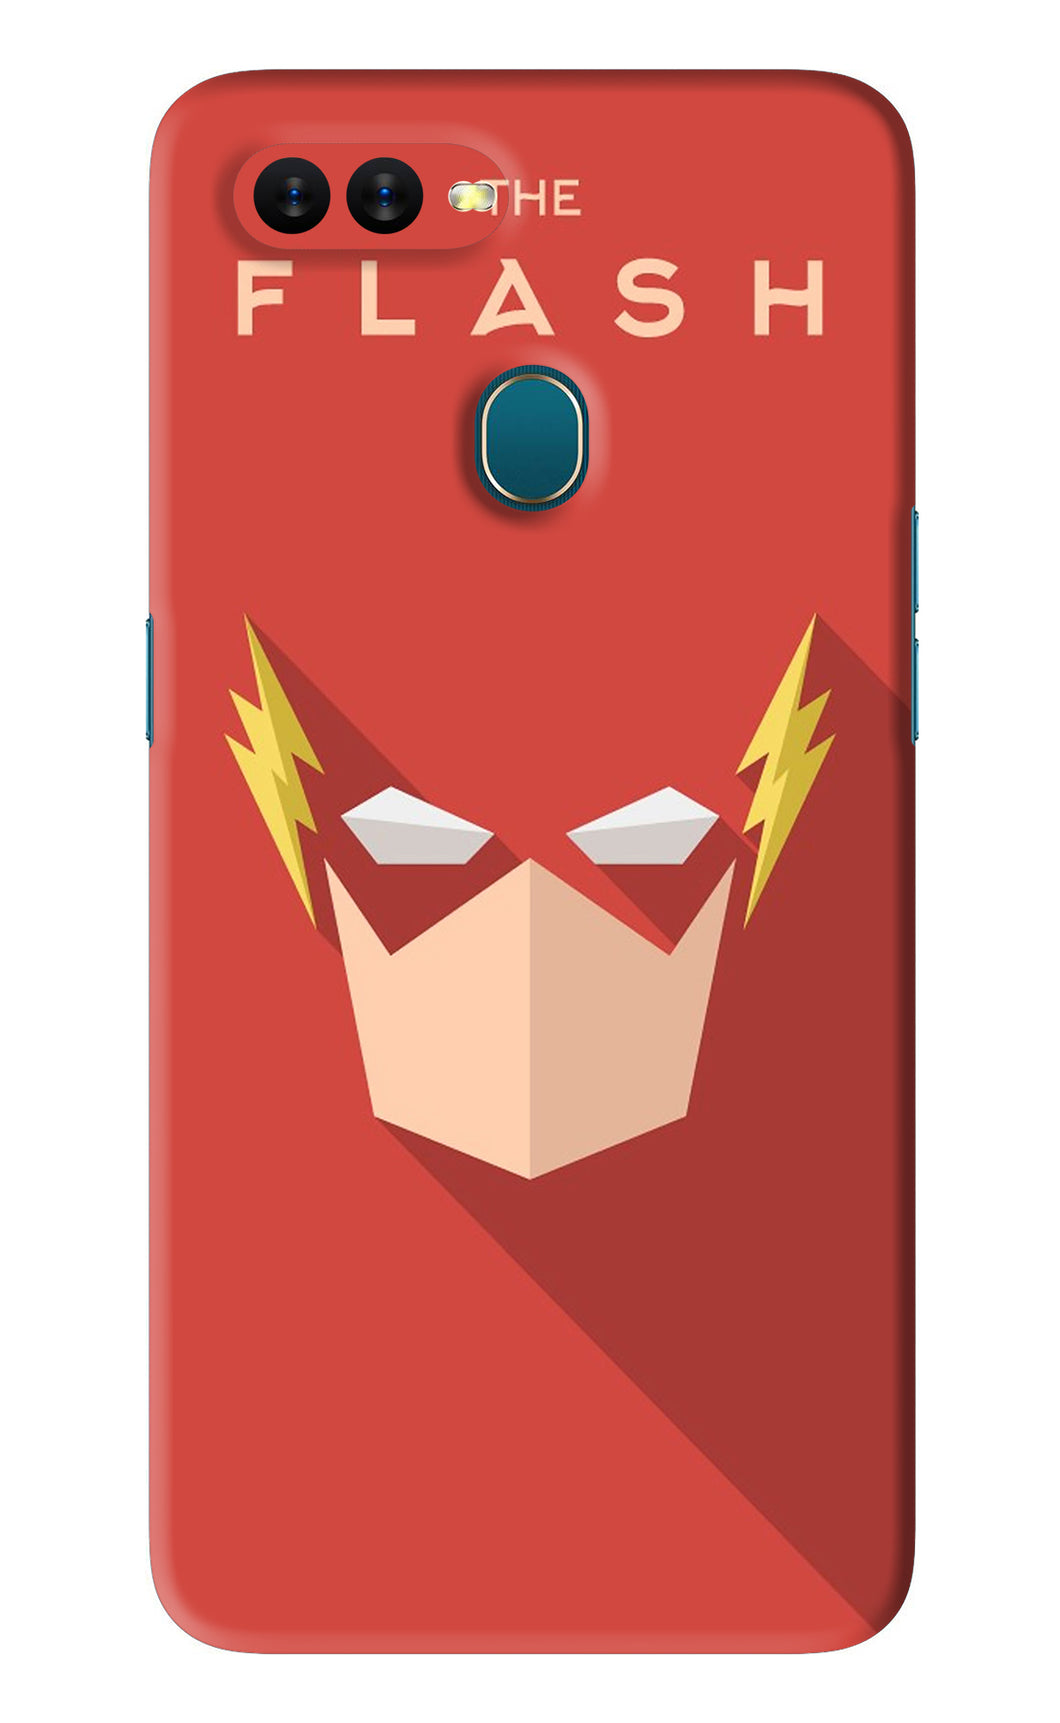 The Flash Oppo A12 Back Skin Wrap